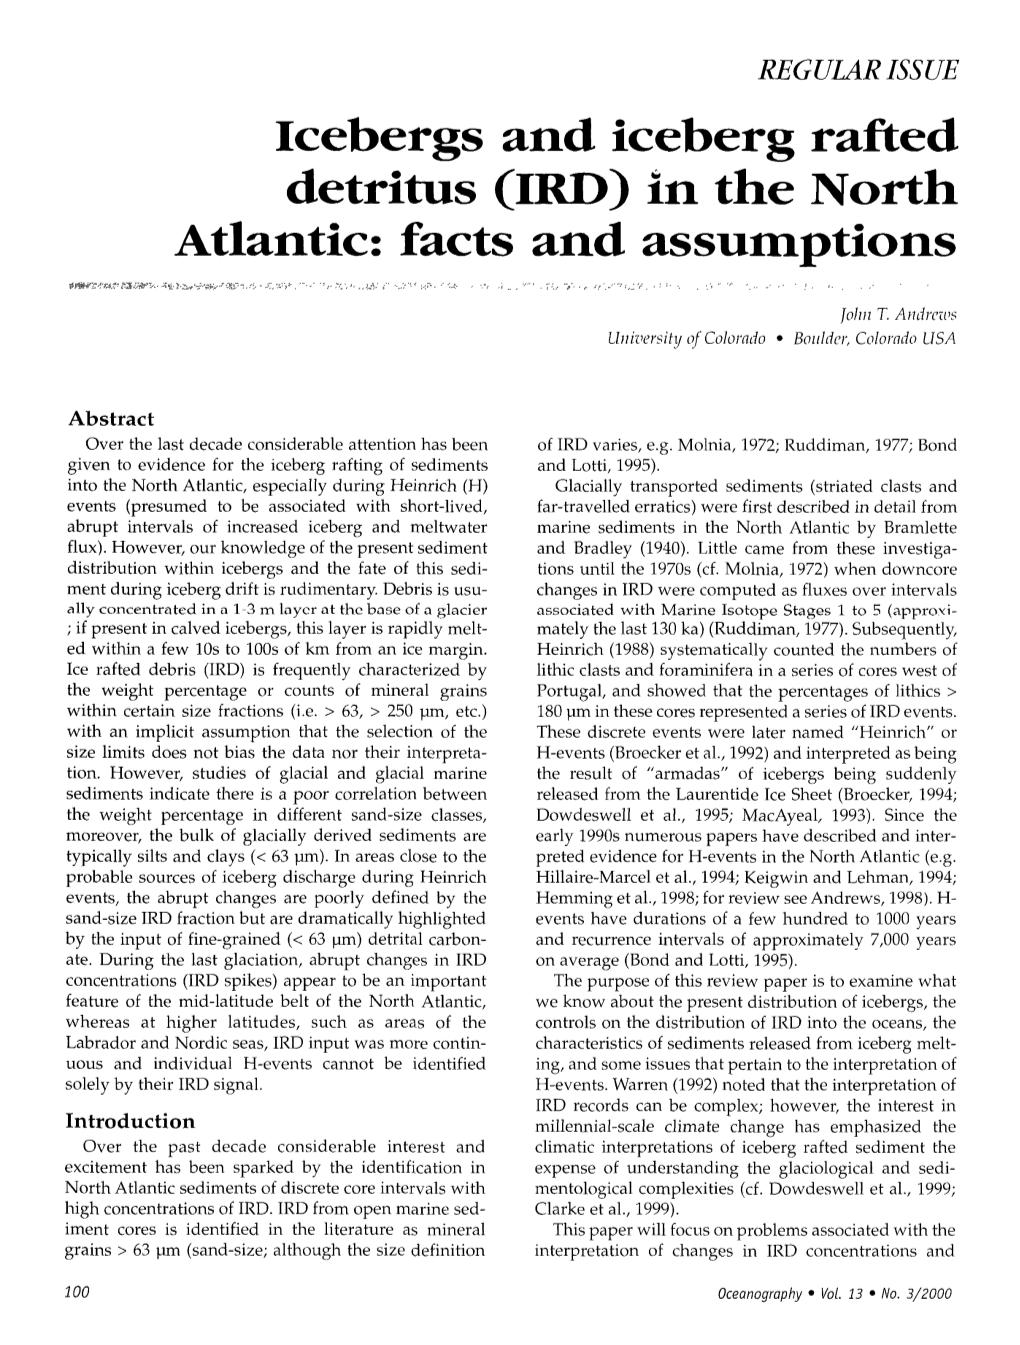 Icebergs and Iceberg Rafted Detritus (IRD) in the North Atlantic: Facts and Assumptions